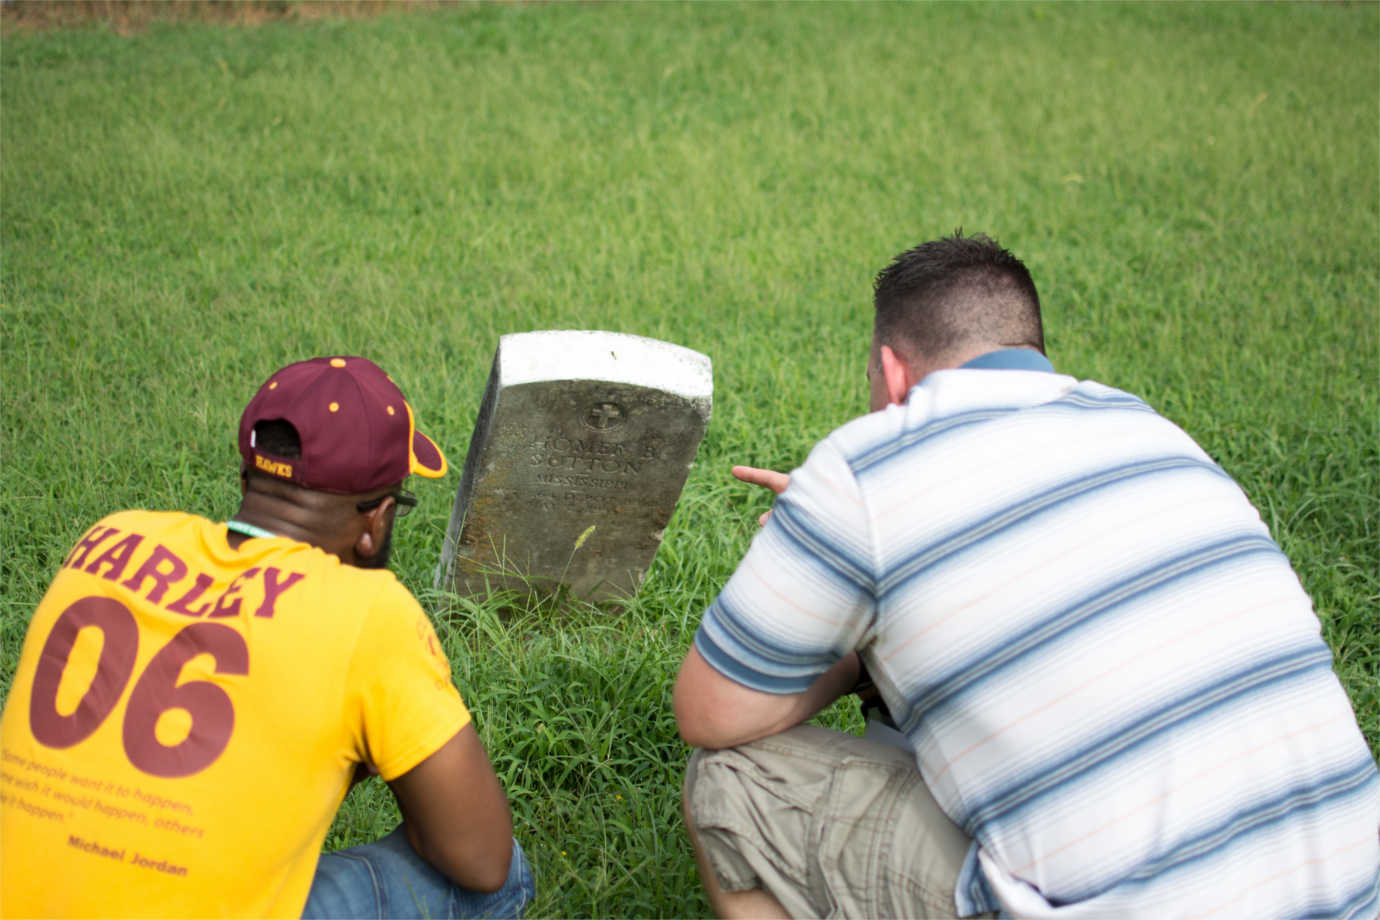 Teachers view a tombstone at the Live Oak Cemetery, a historic African American burial ground in Greenville, Mississippi. Image courtesy of the Delta Center for Culture and Learning at Delta State University.